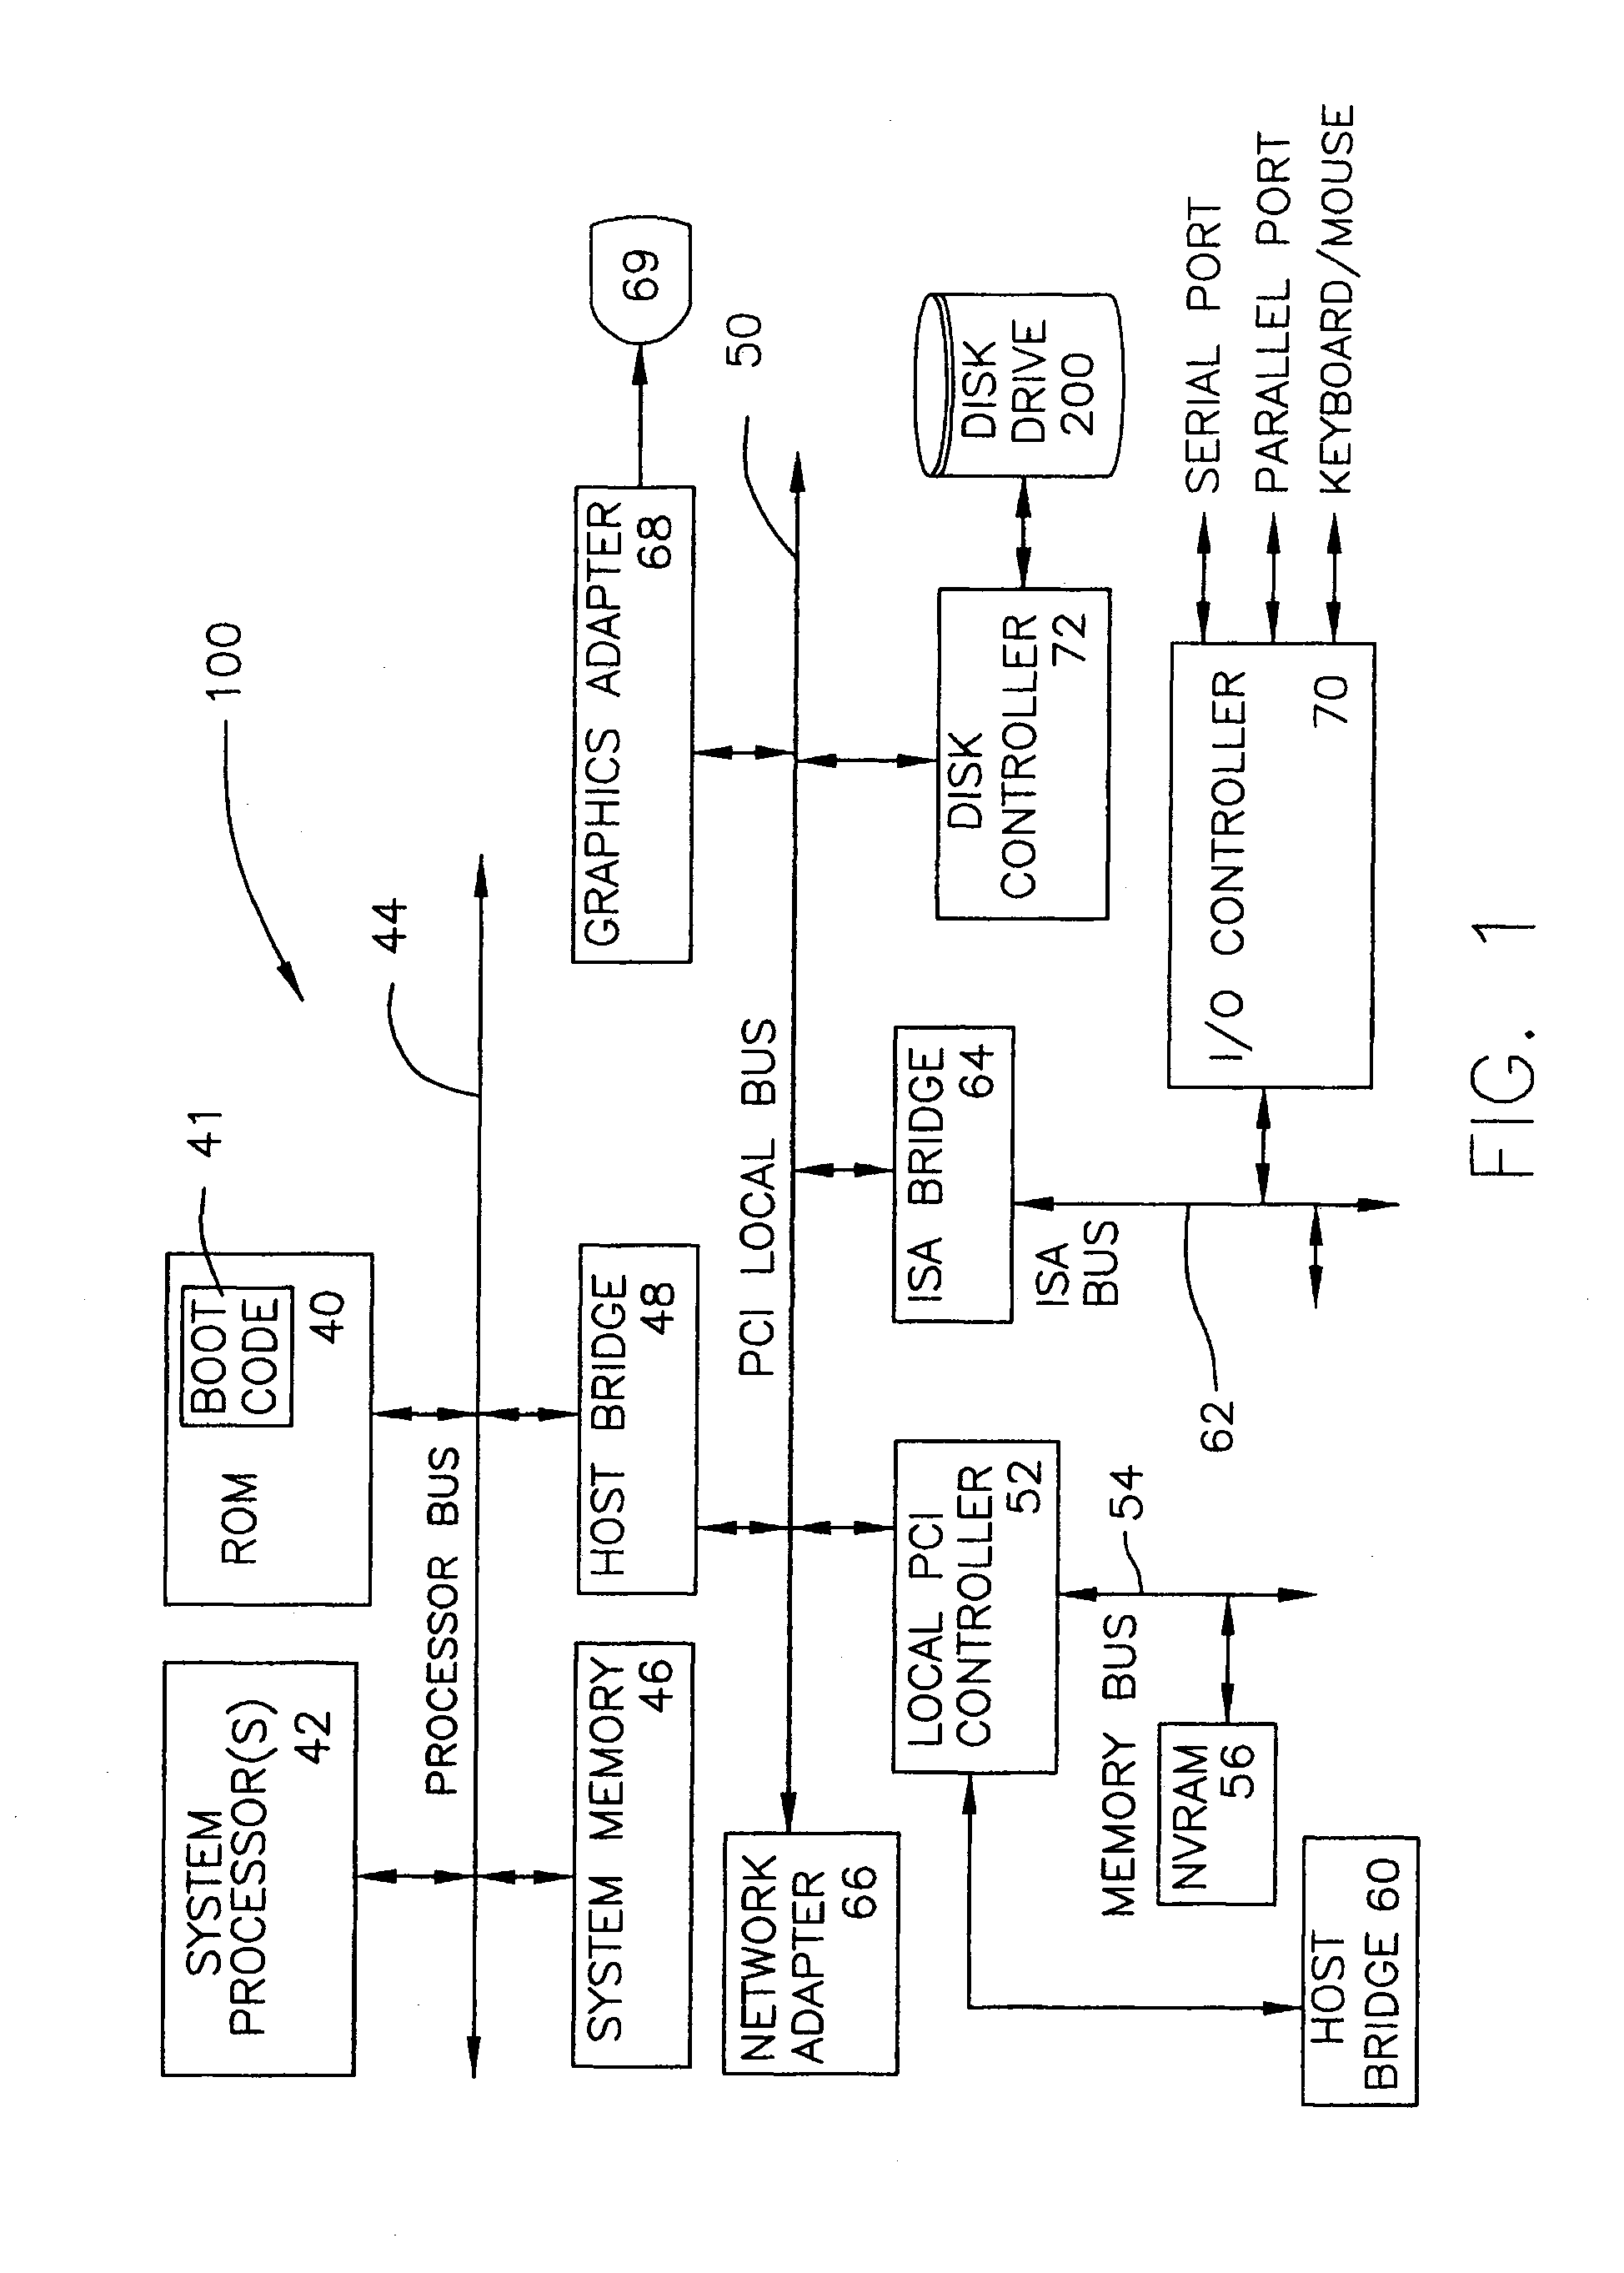 Tool-less retention system for an electronic device